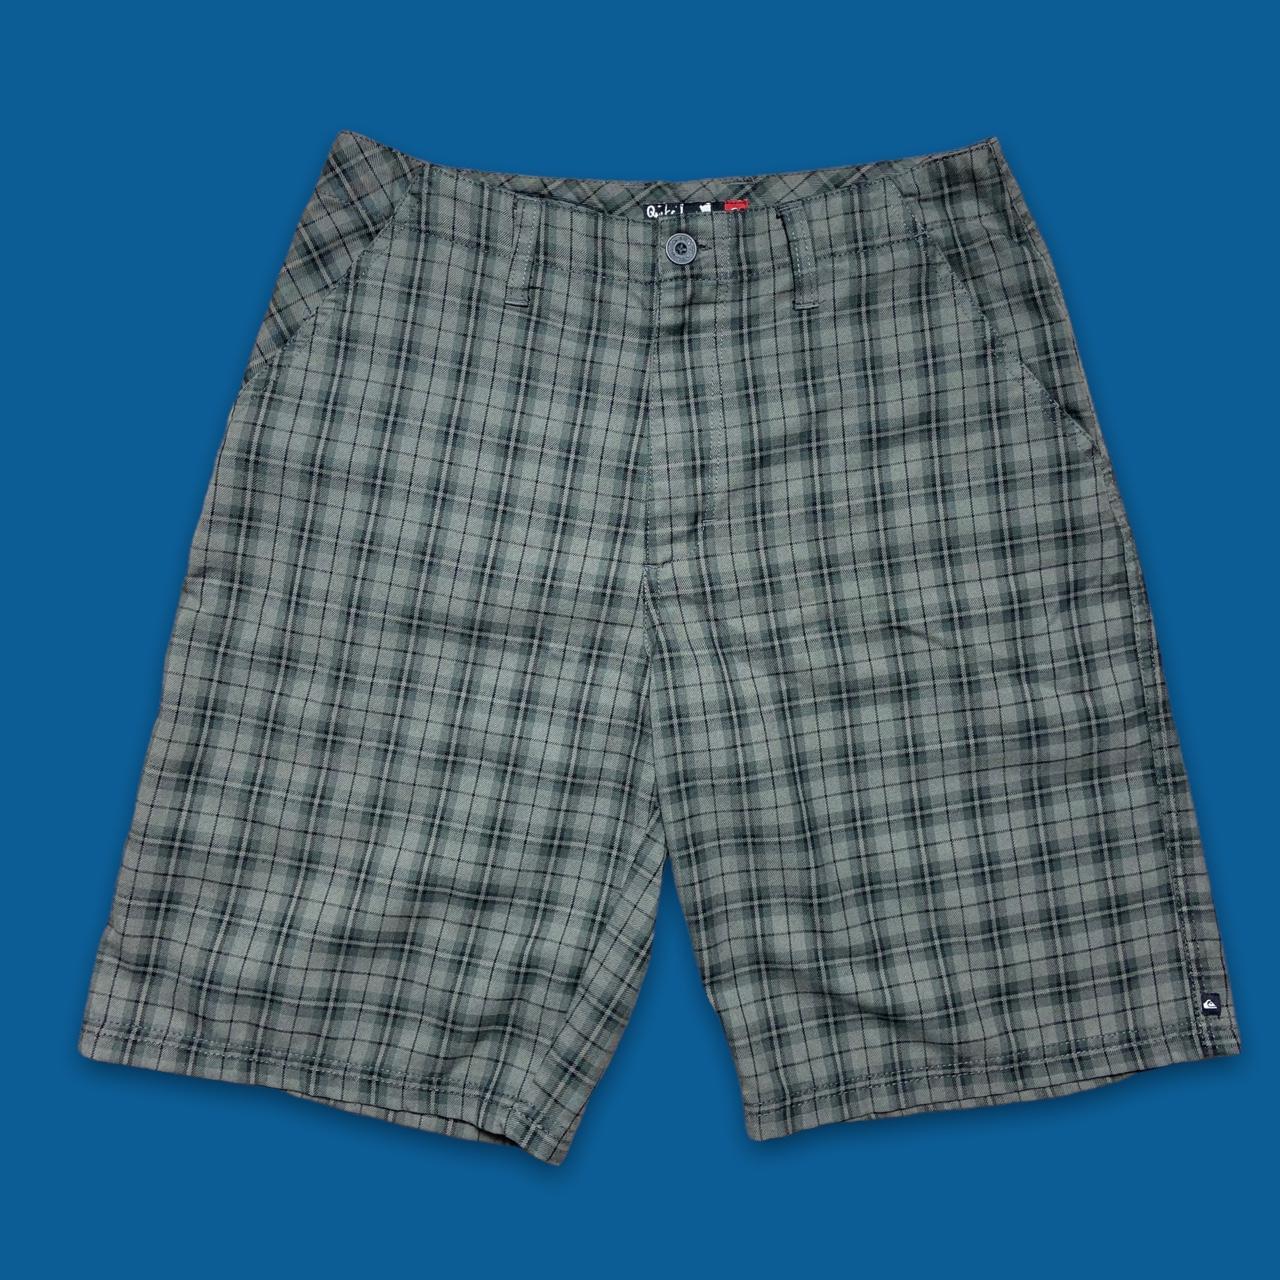 Quiksilver Men's Black and Green Shorts